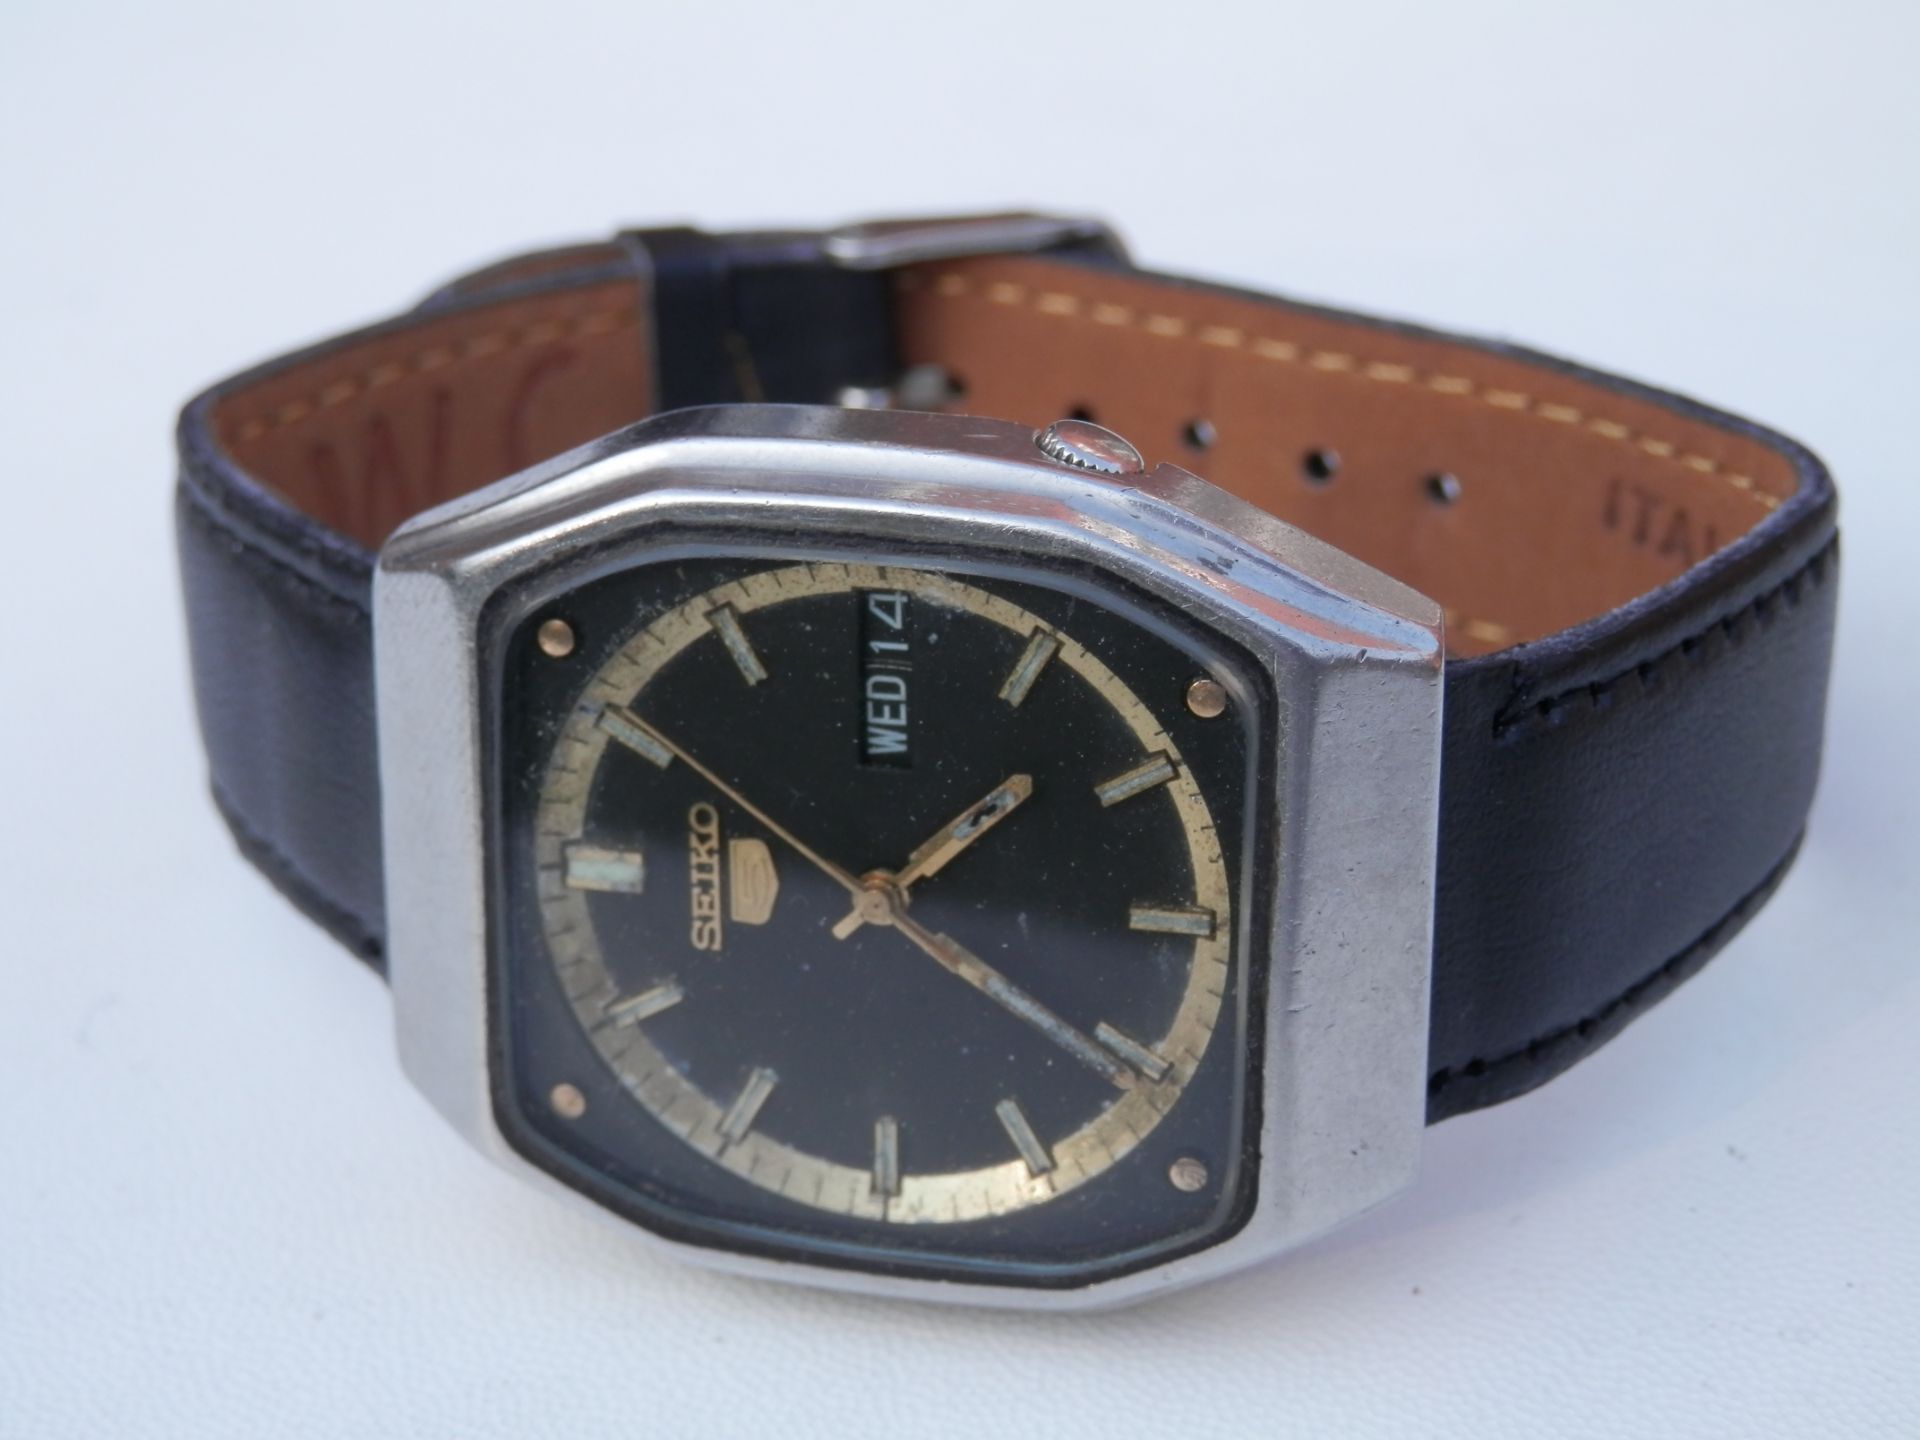 1981 SEIKO 5 AUTOMATIC DAY & DATE JEWELLED WATCH, BLACK & GOLD DIAL, RARE WORKING WATCH - Image 4 of 11